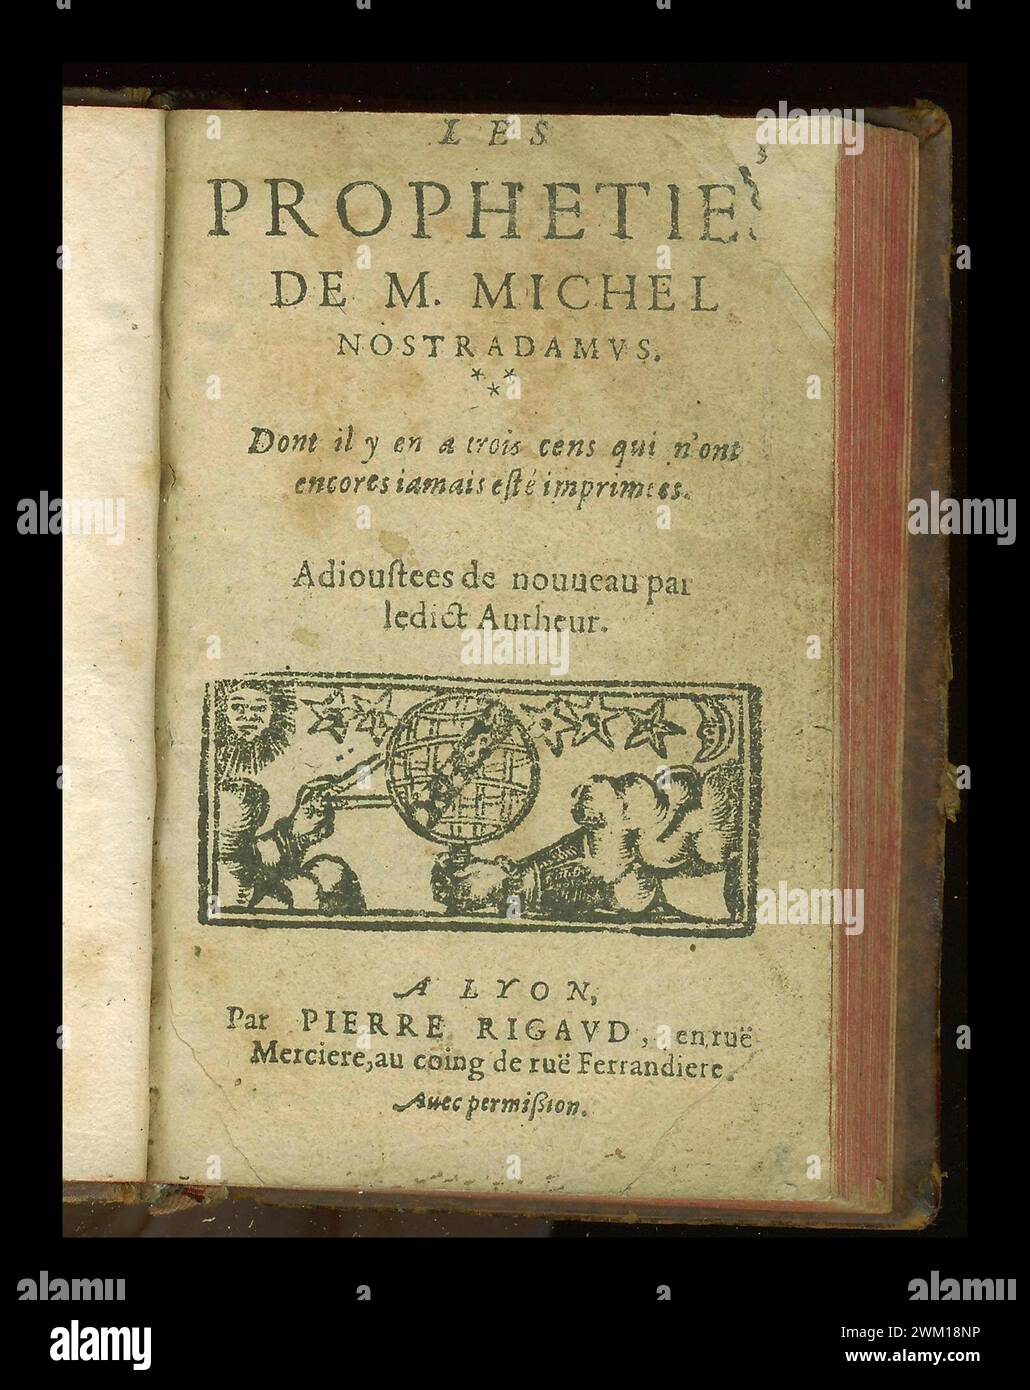 3833224 Nostradamus Prophecies; (add.info.: Frontispiece of an edition of Nostradamus' Les Propheties (Prophecies), published for the first time in Lyon in 1555); © Marcello Mencarini. All rights reserved 2024. Stock Photo